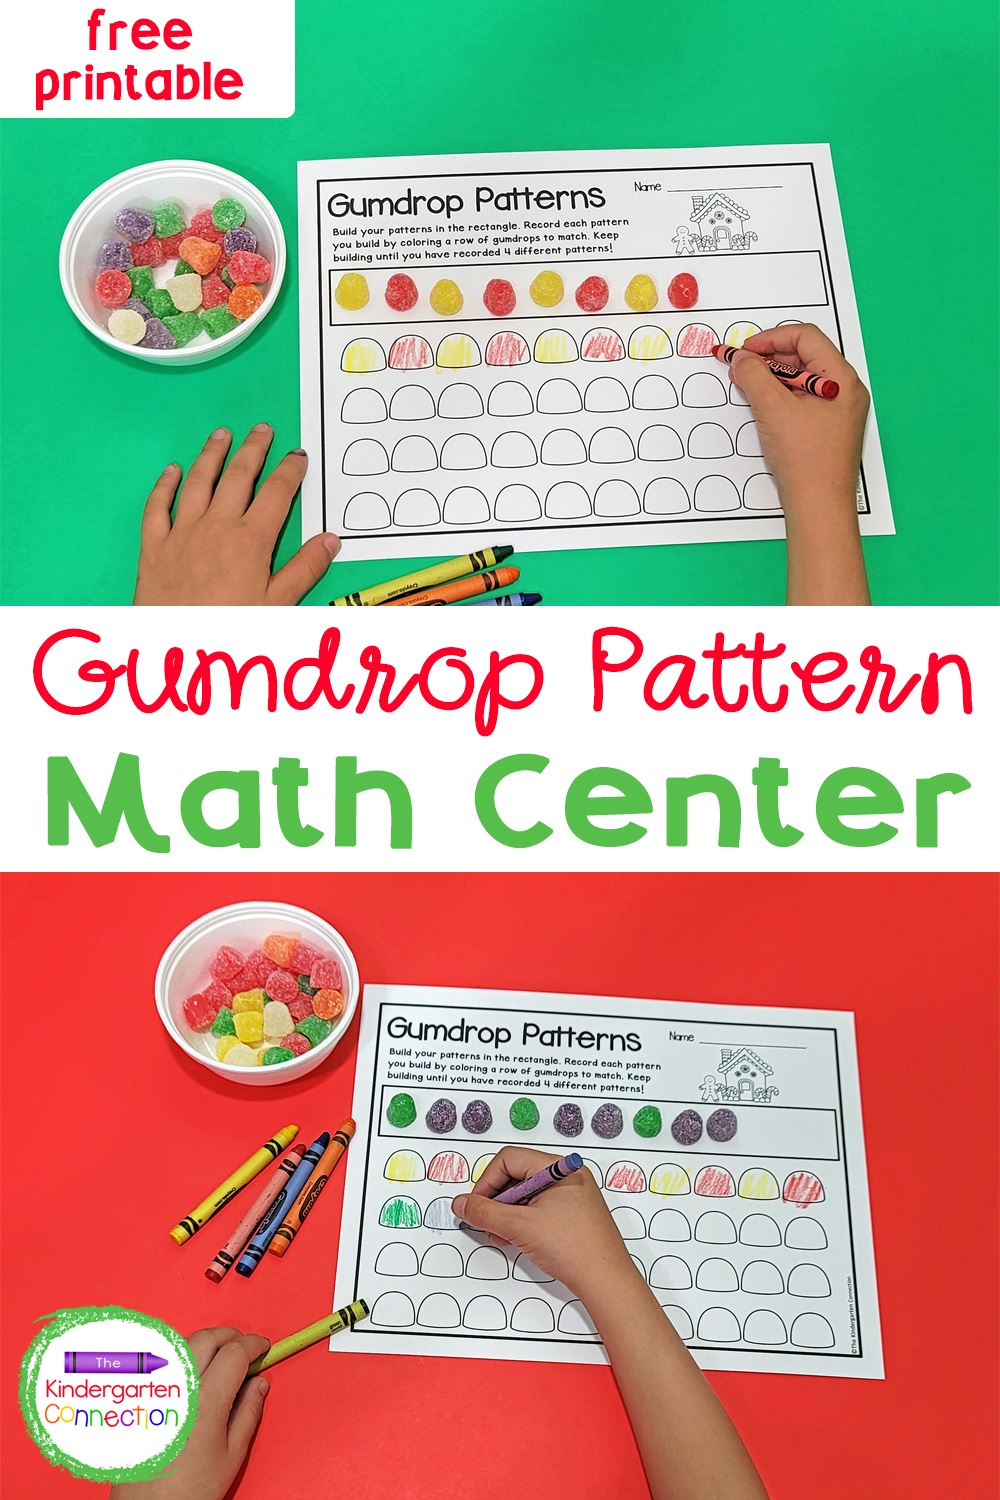 This free Gumdrop Pattern Printable is a fun, hands-on way to learn about patterns with your preschooler, kindergartener, or first grader!